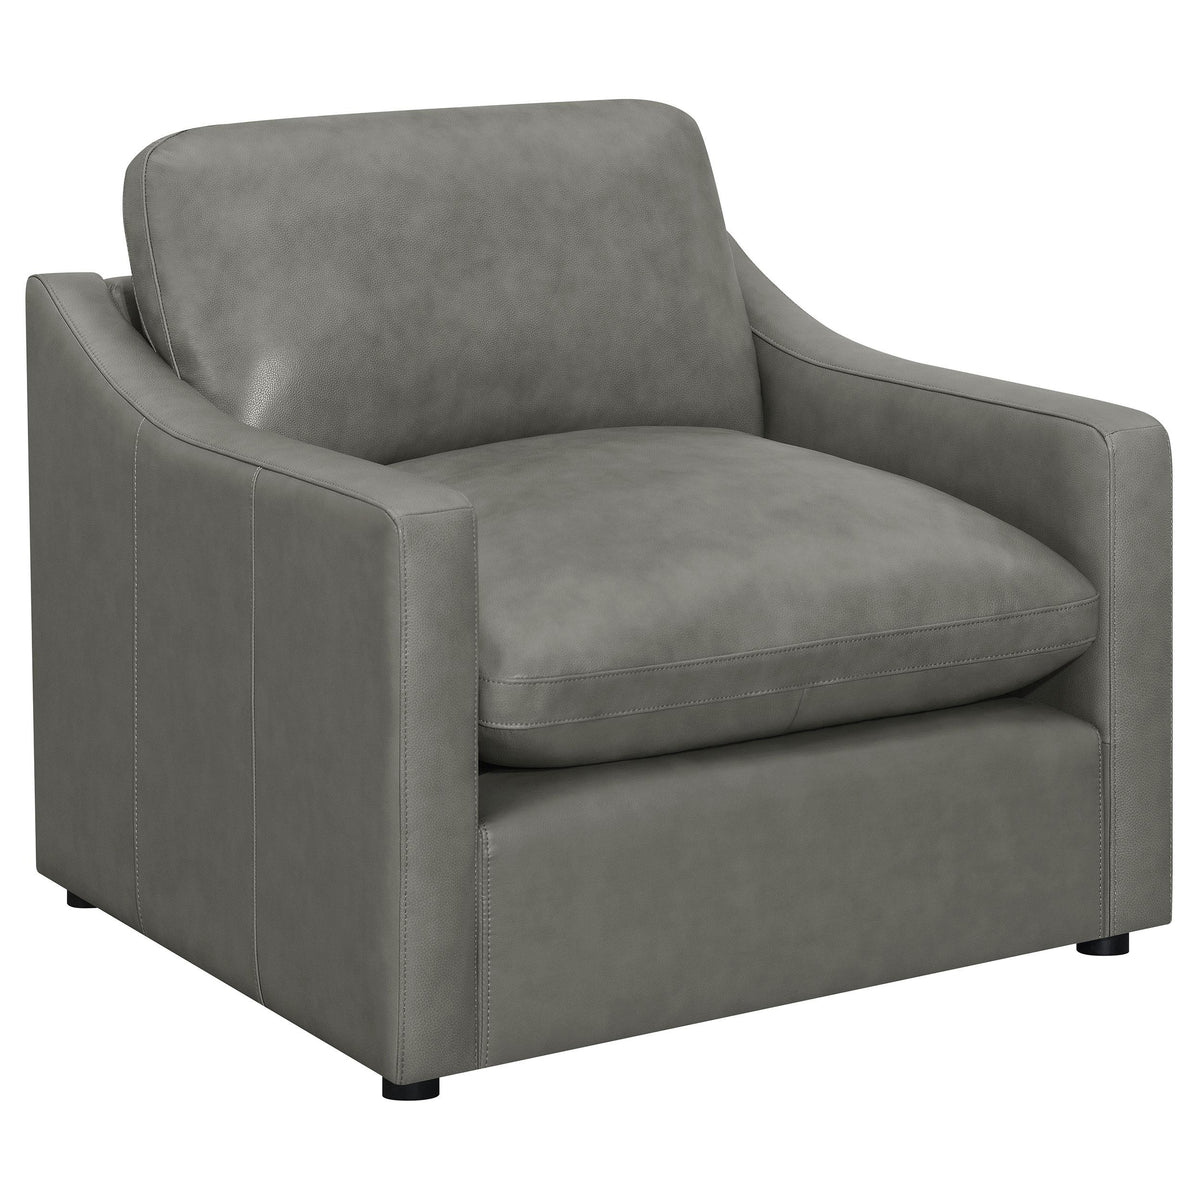 Grayson Sloped Arm Upholstered Chair Grey  Half Price Furniture